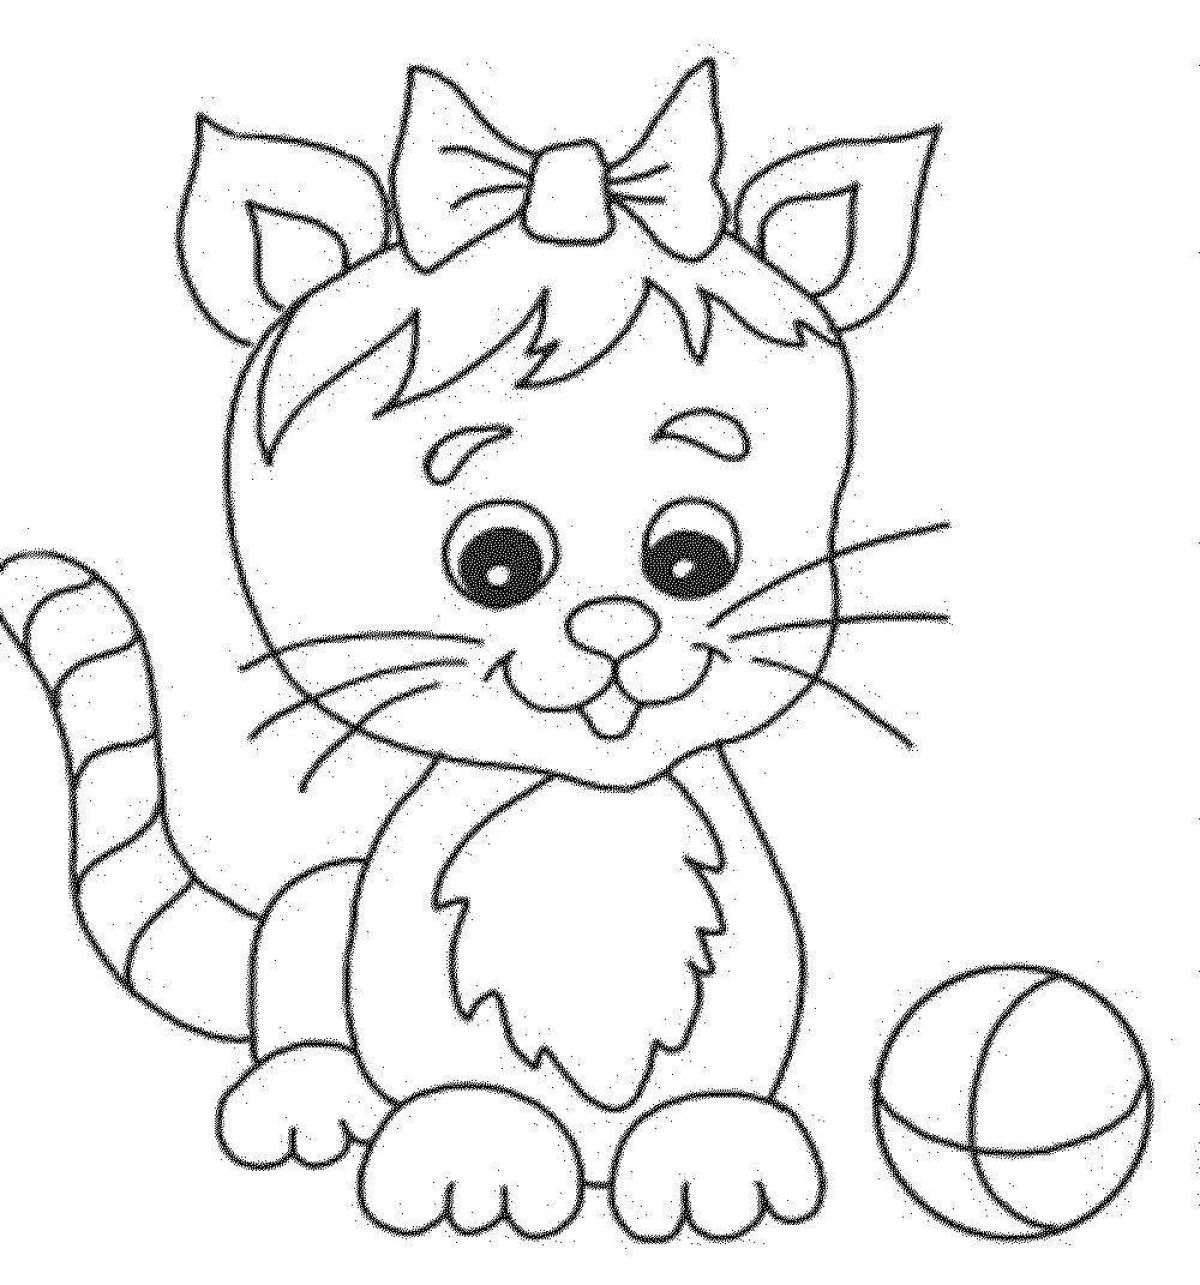 Adorable cat coloring page for kids